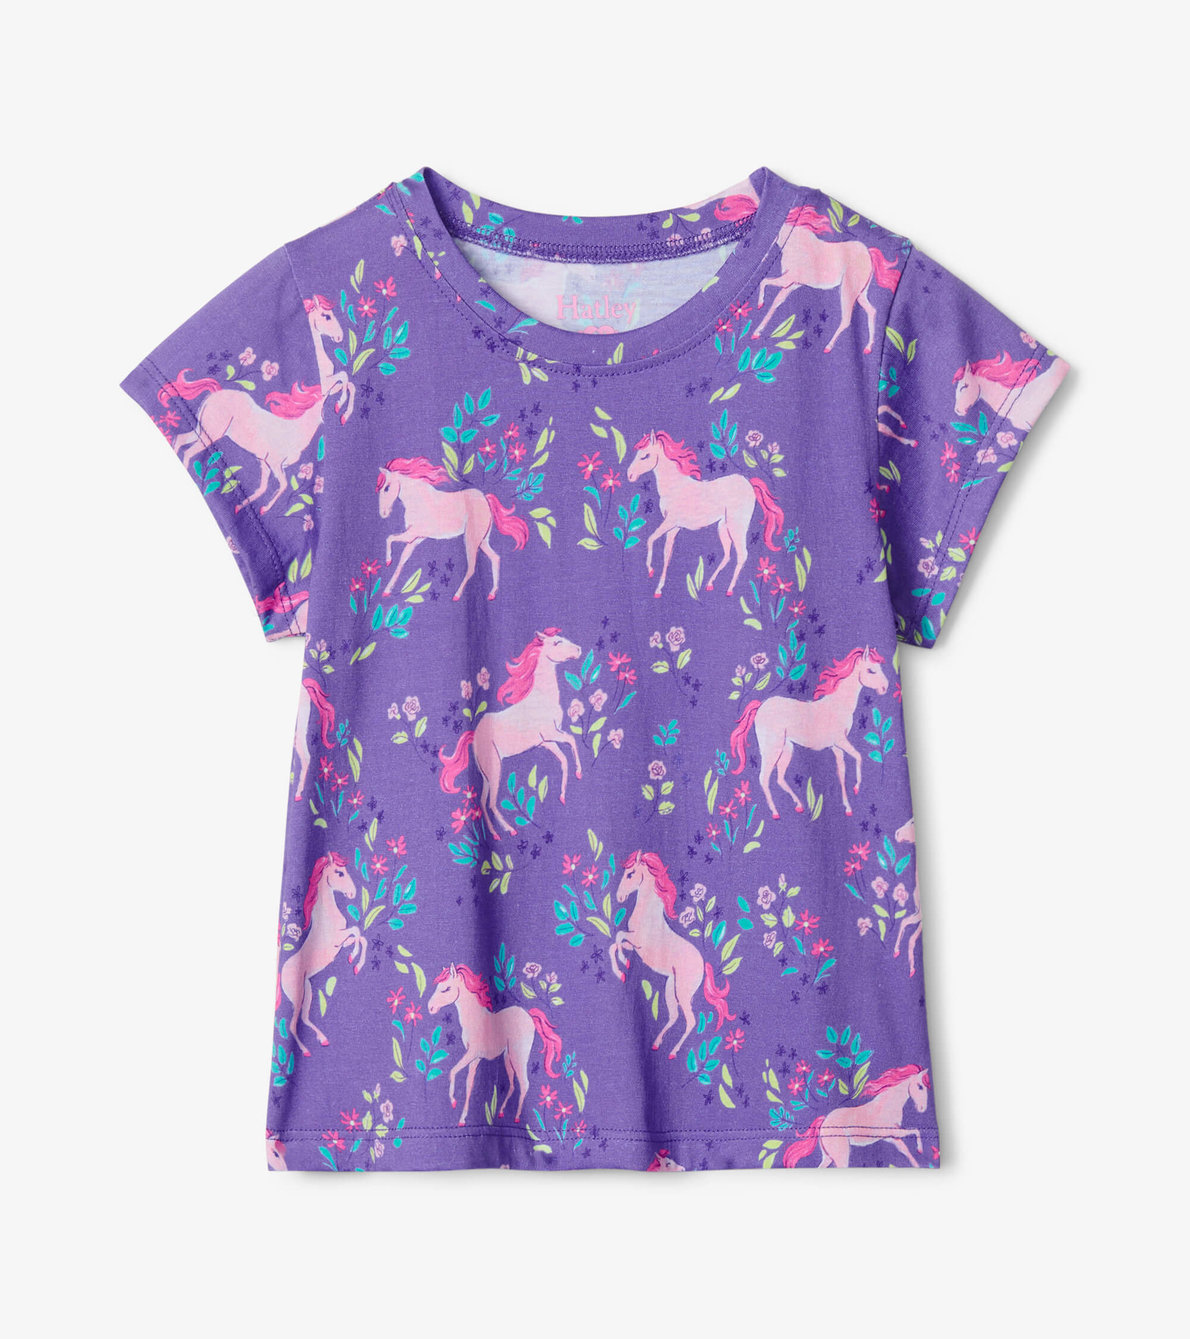 View larger image of Meadow Pony Toddler Graphic Tee